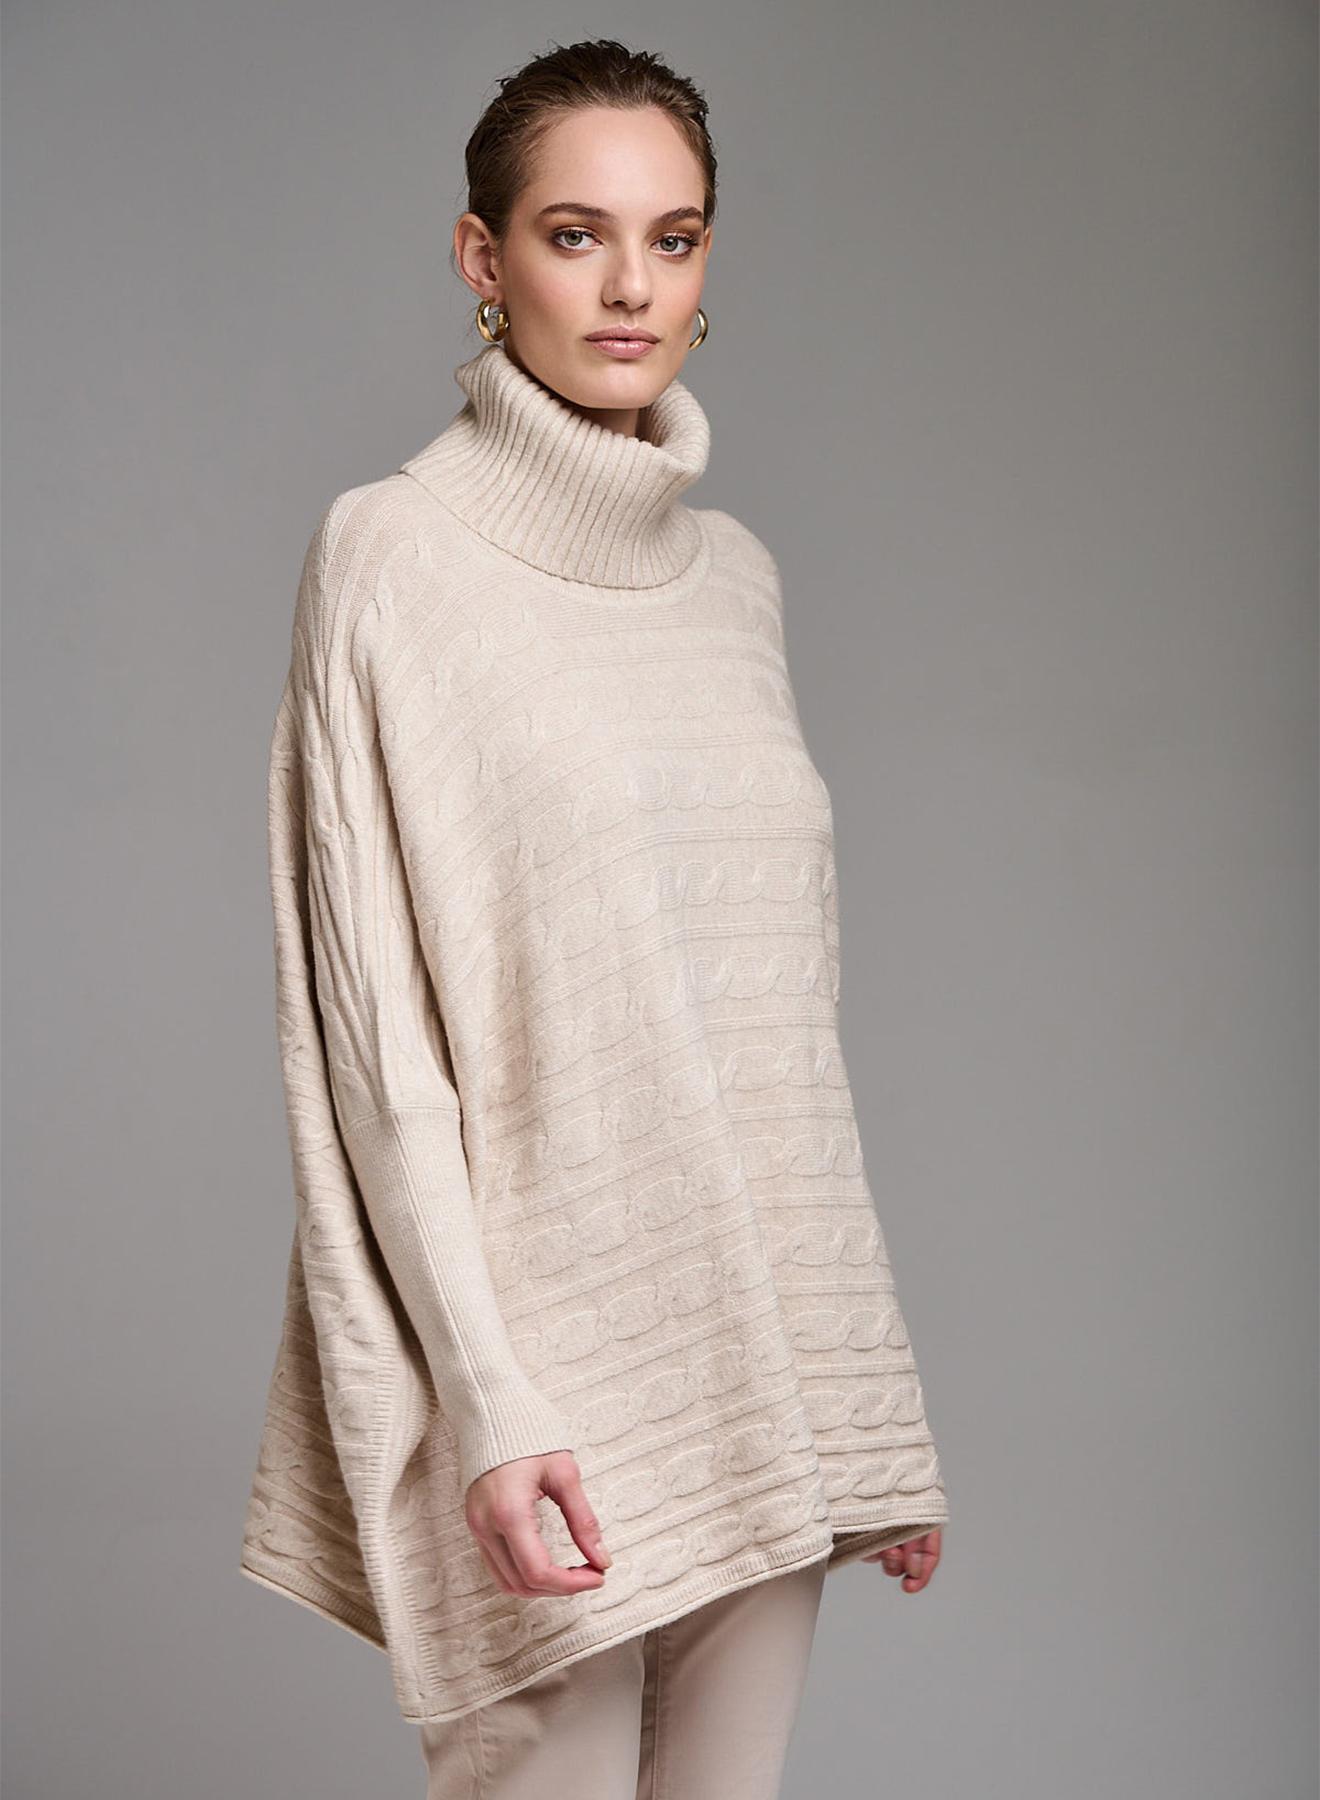 Oversized turtleneck sweater with textured details - 4